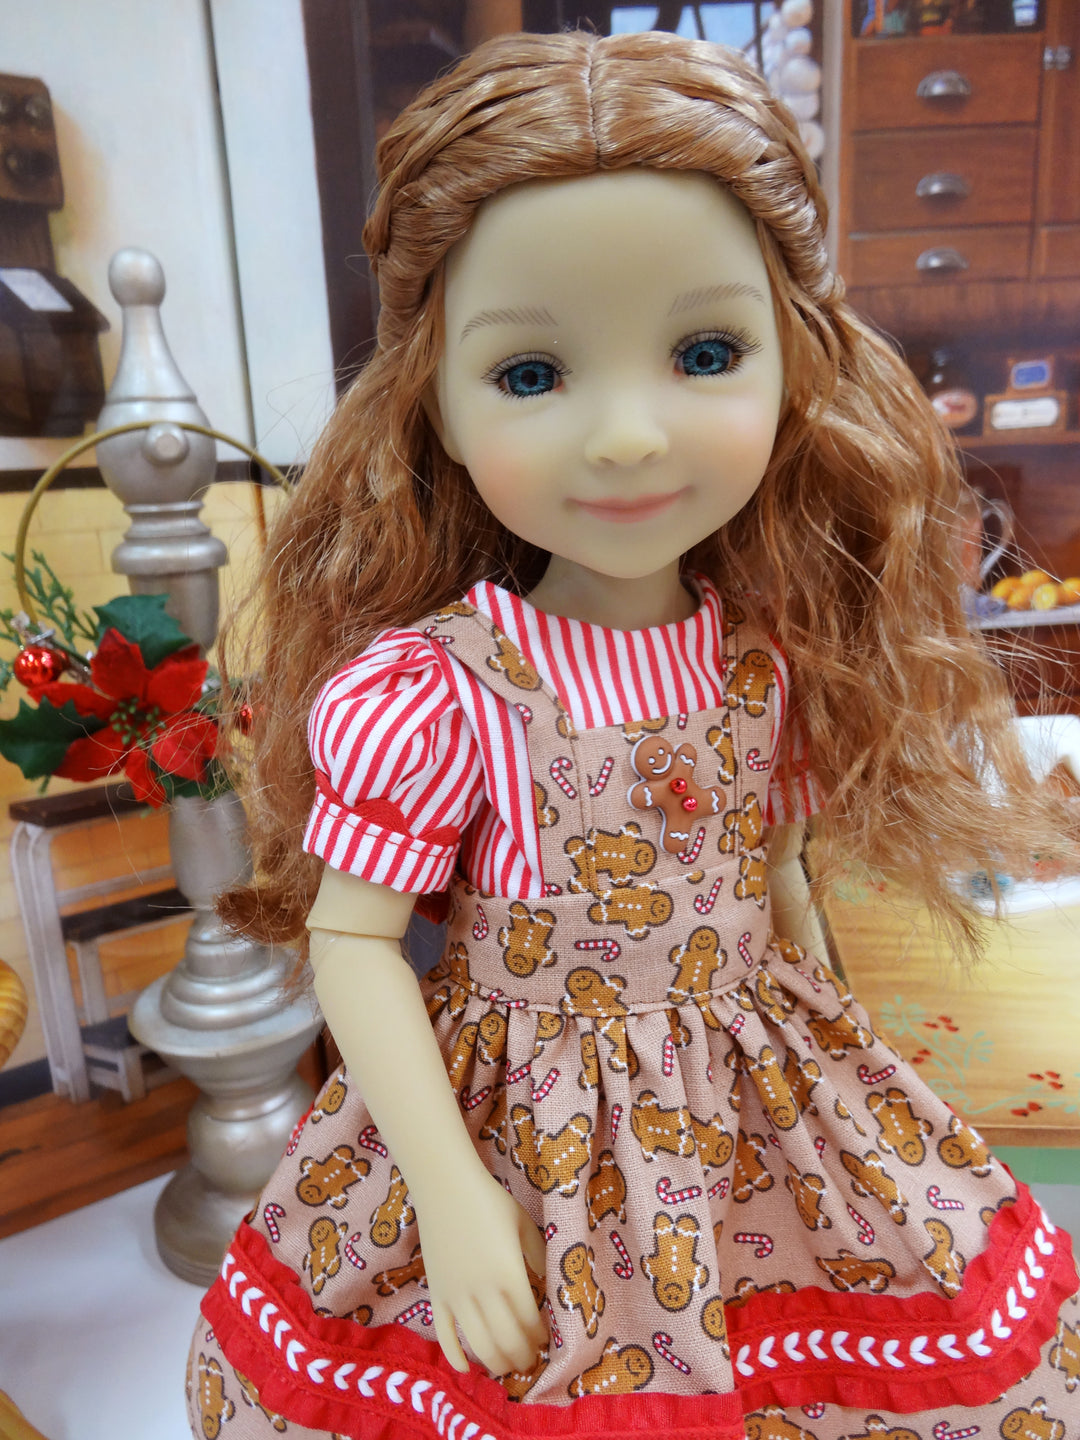 Baking Gingerbread - dress & apron for Ruby Red Fashion Friends doll